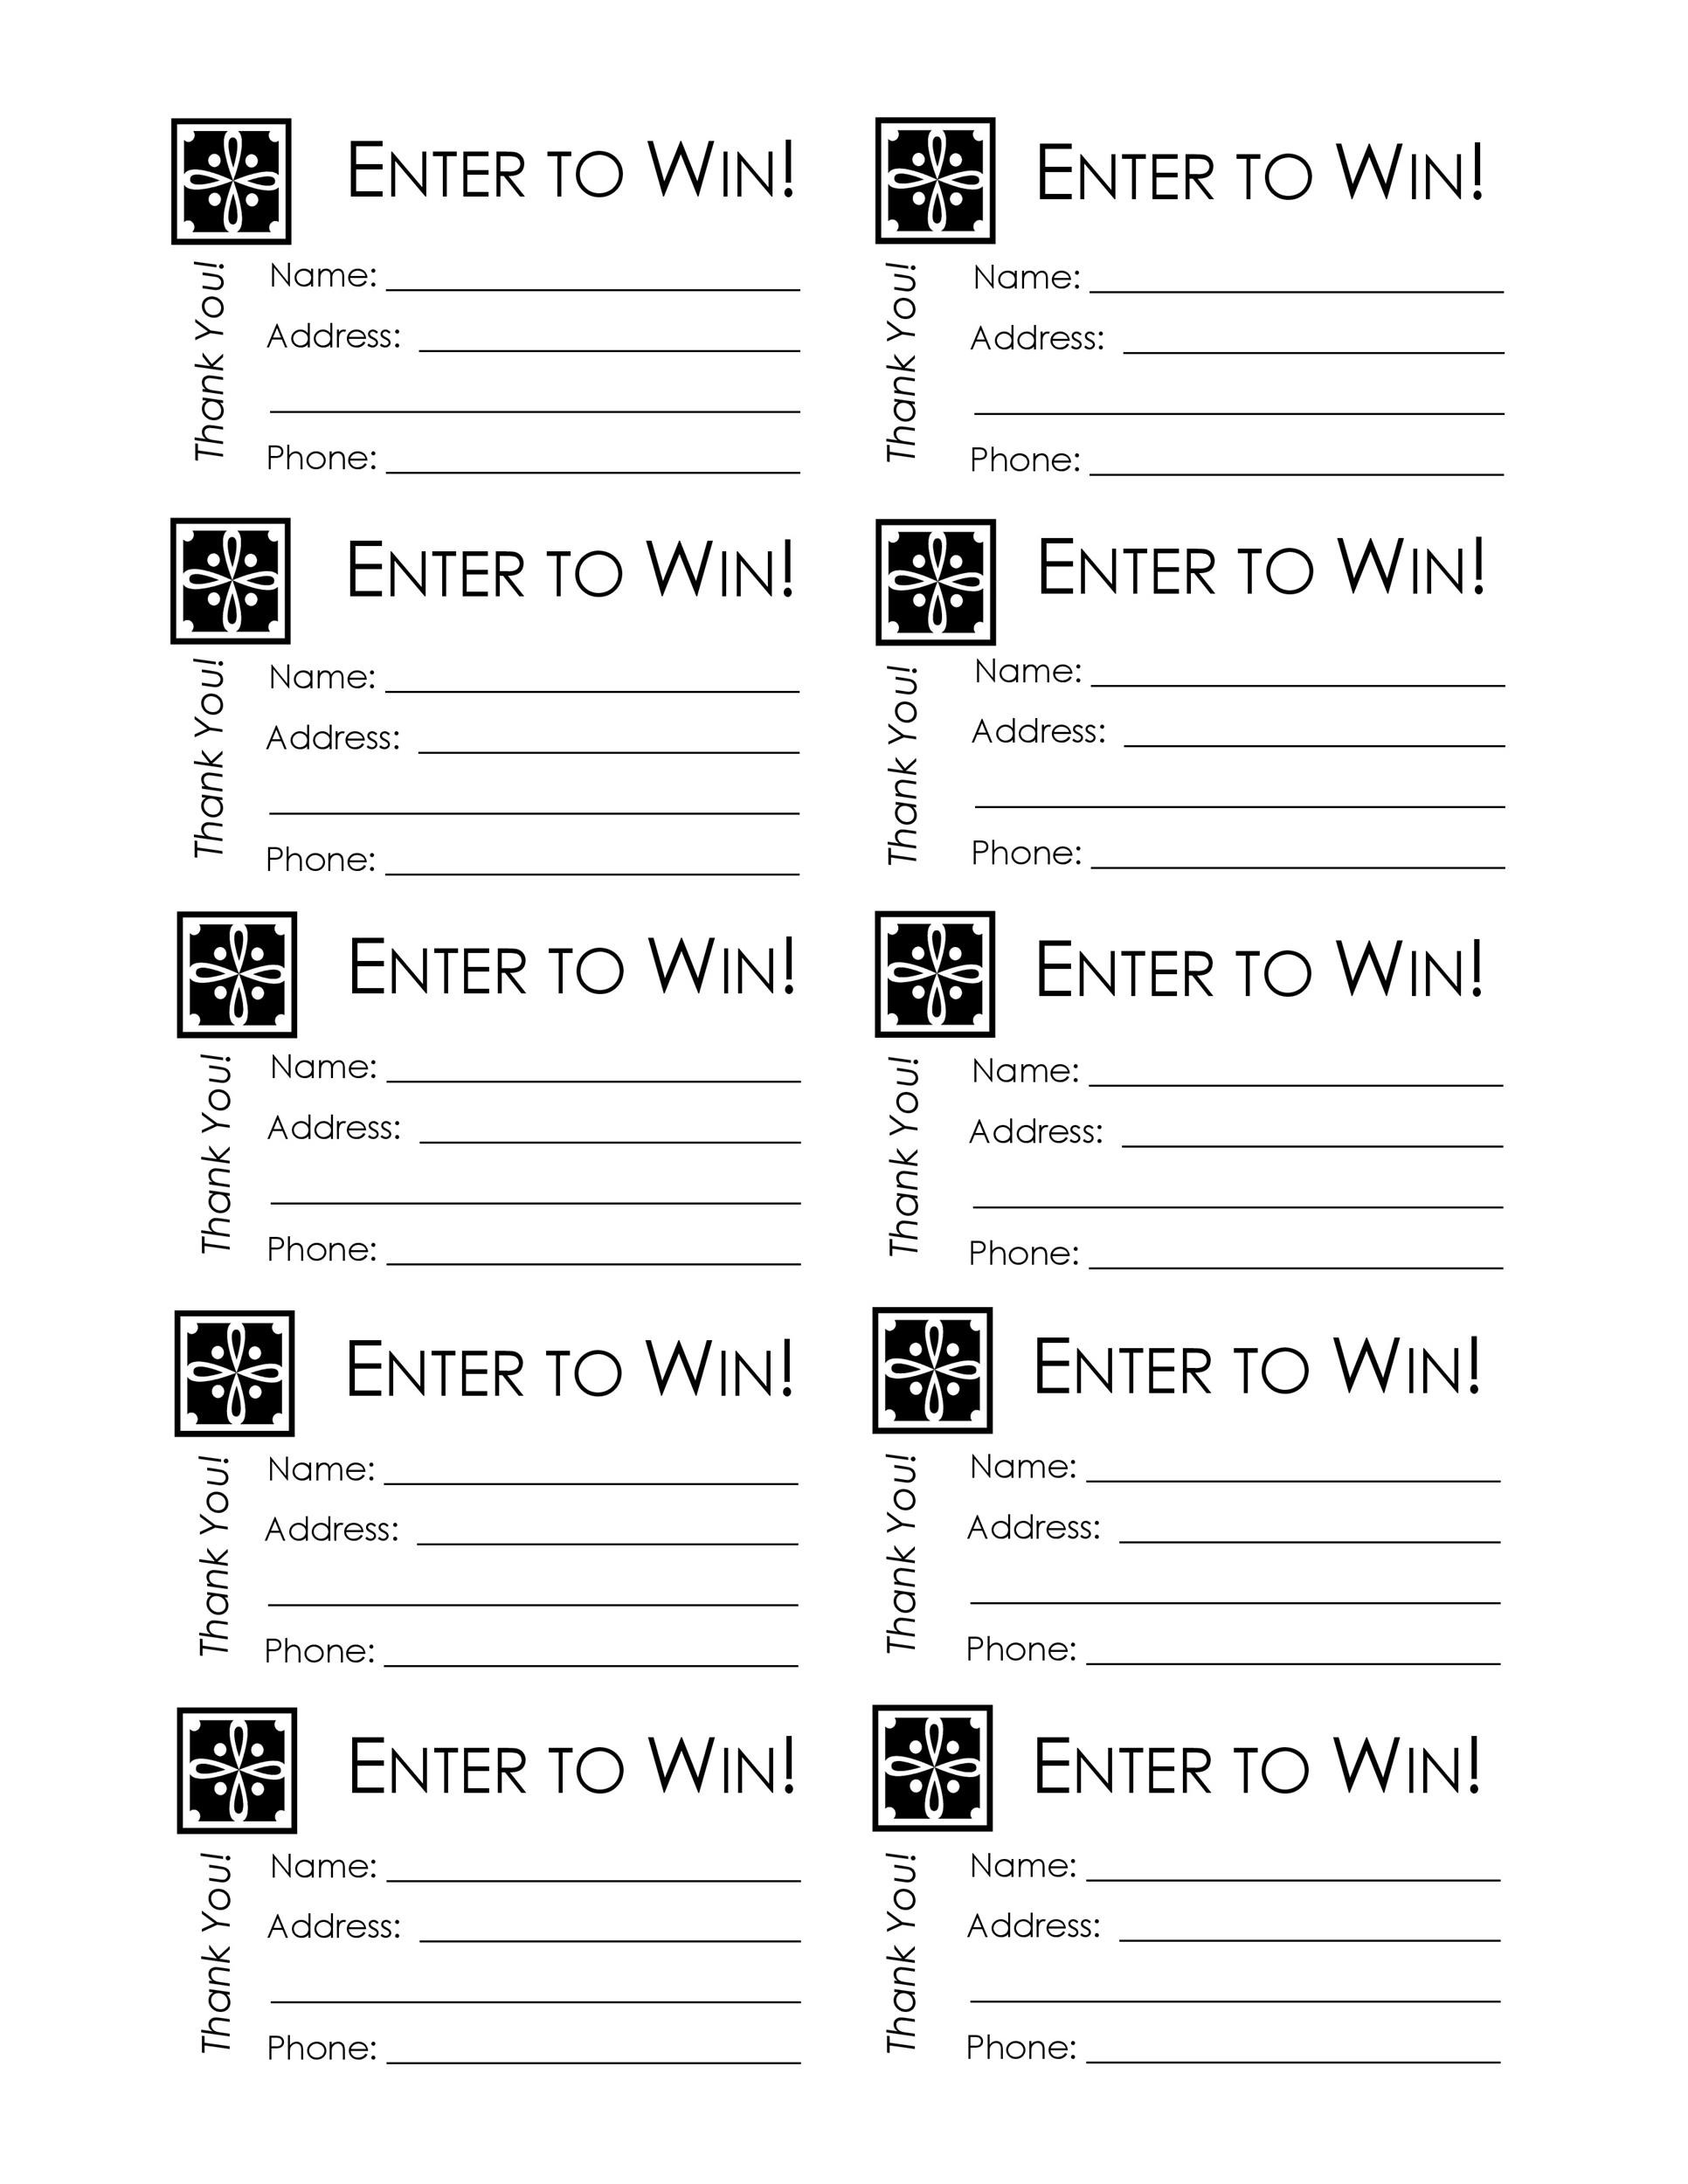 free-ticket-templates-8-per-page-of-free-printable-raffle-ticket